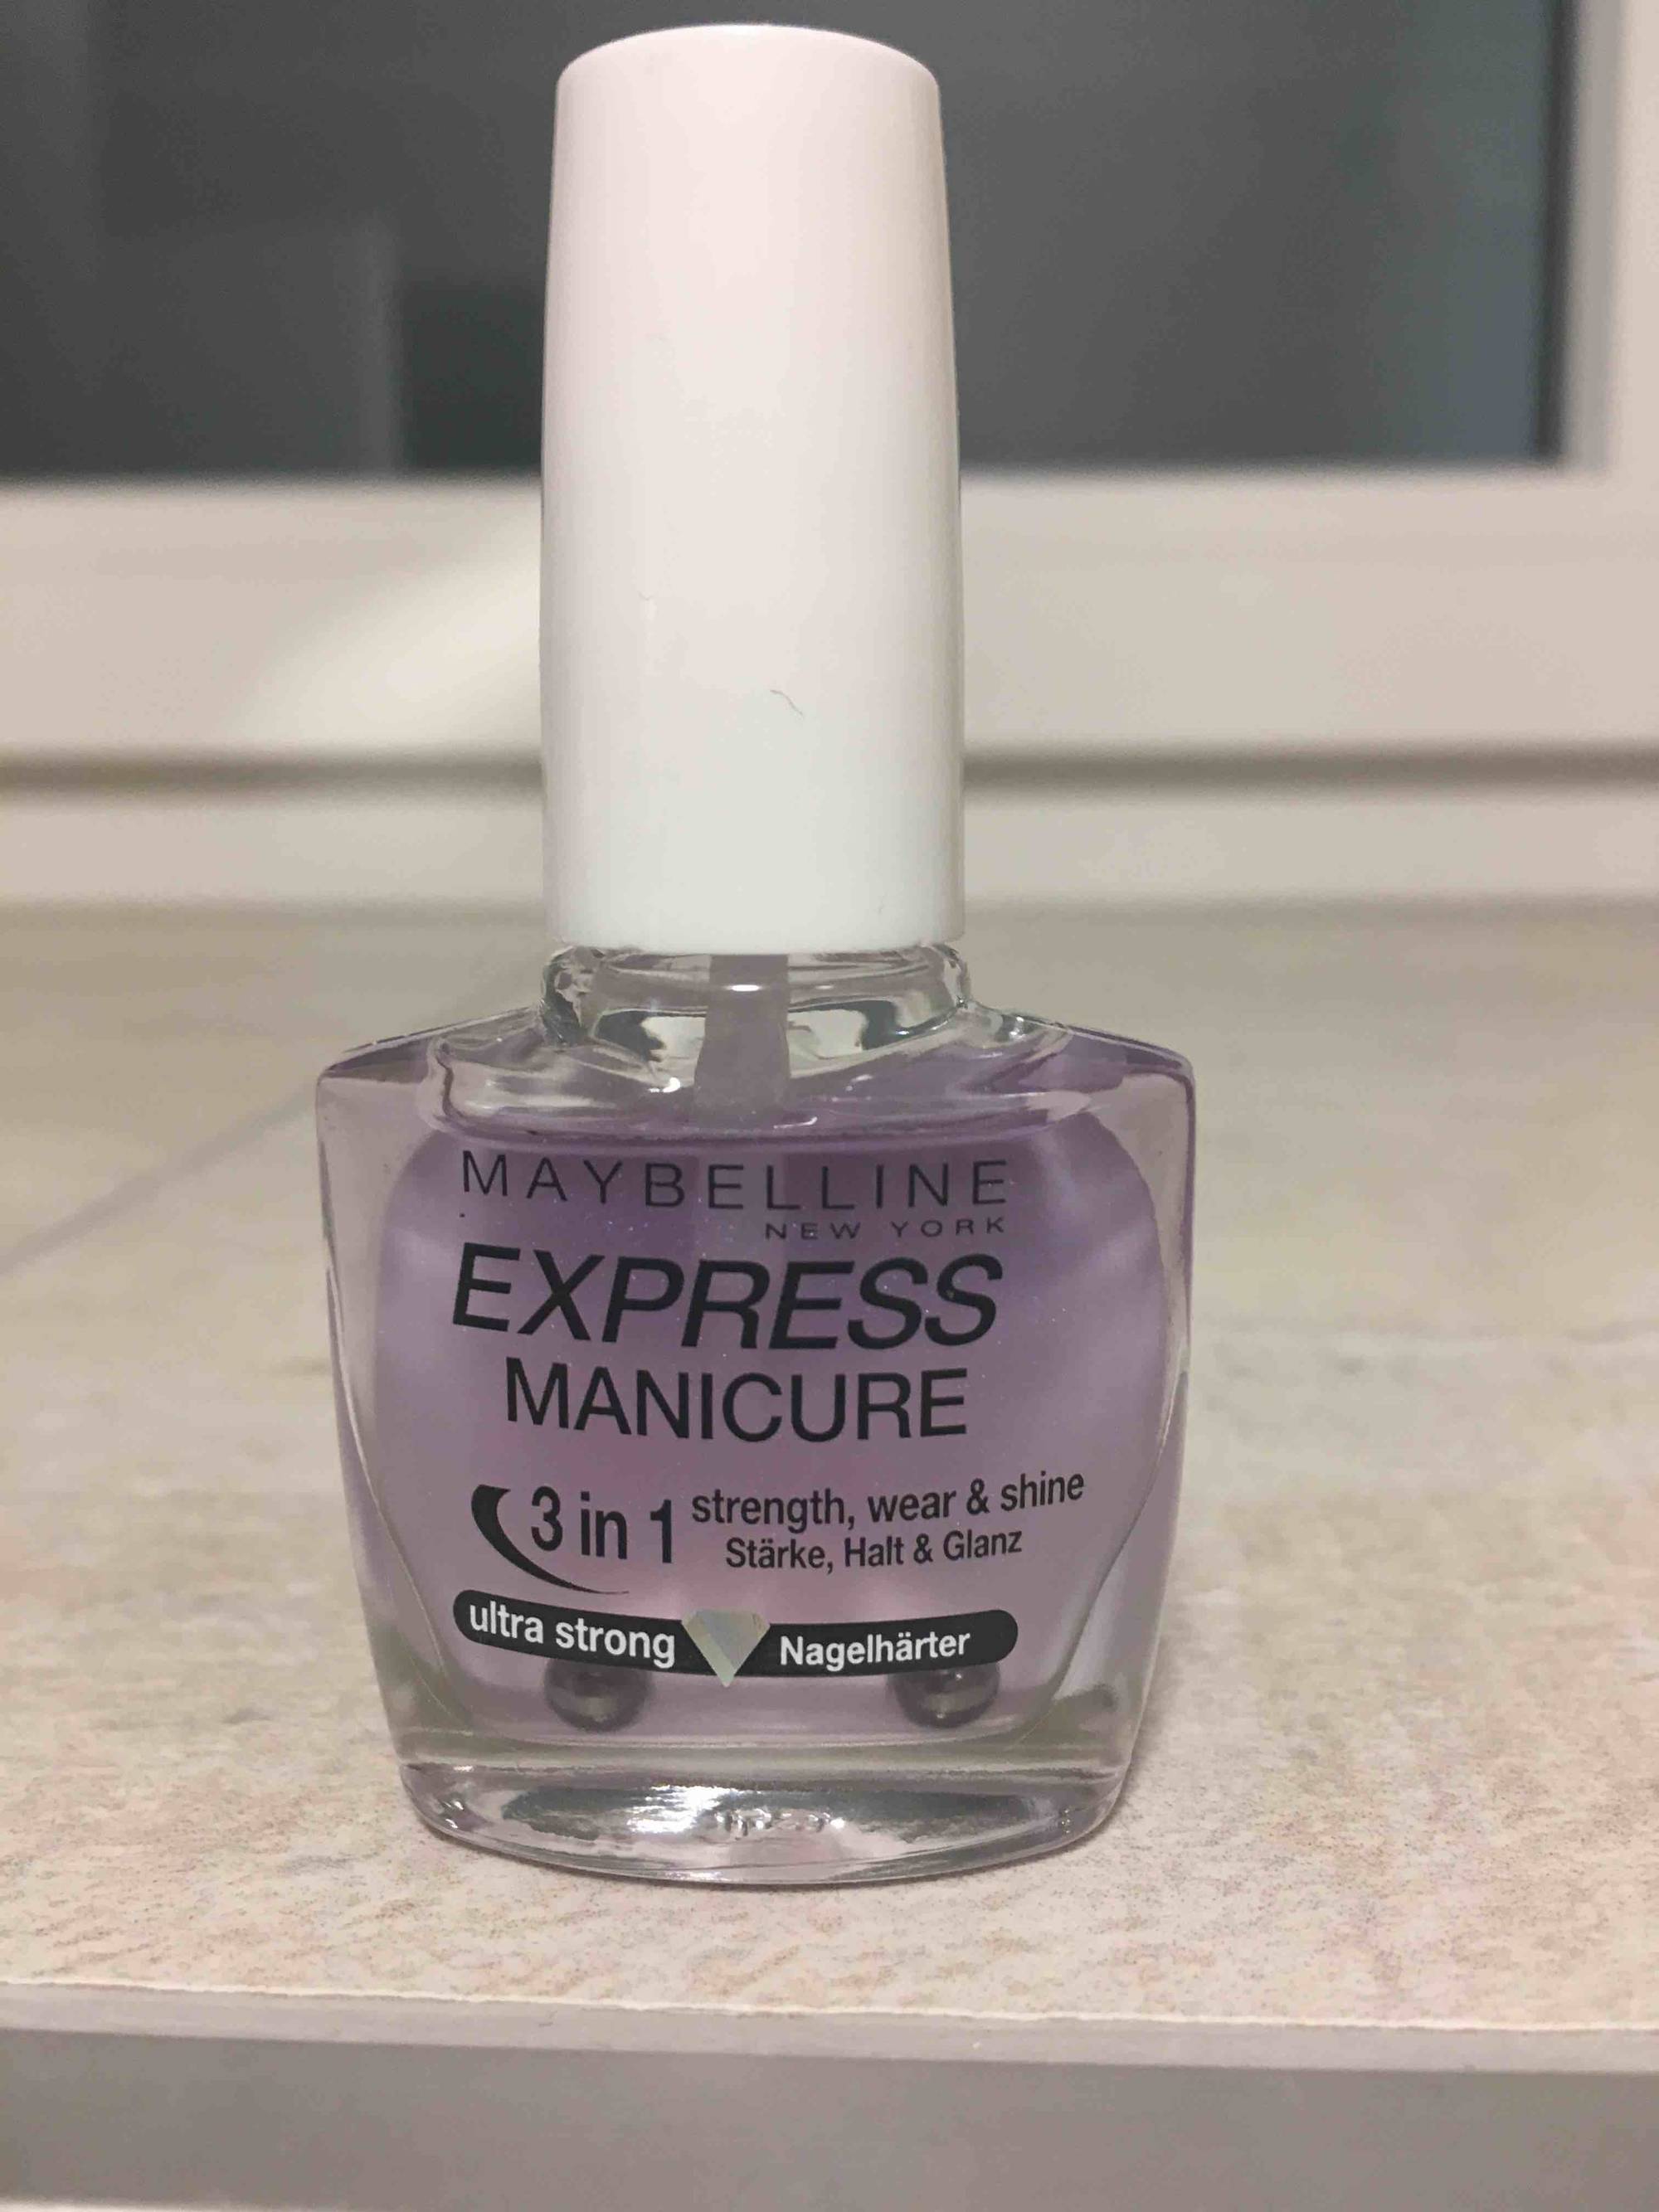 Composition - UFC-Que YORK strong manicure in 1 Ultra - NEW Express Choisir 3 MAYBELLINE